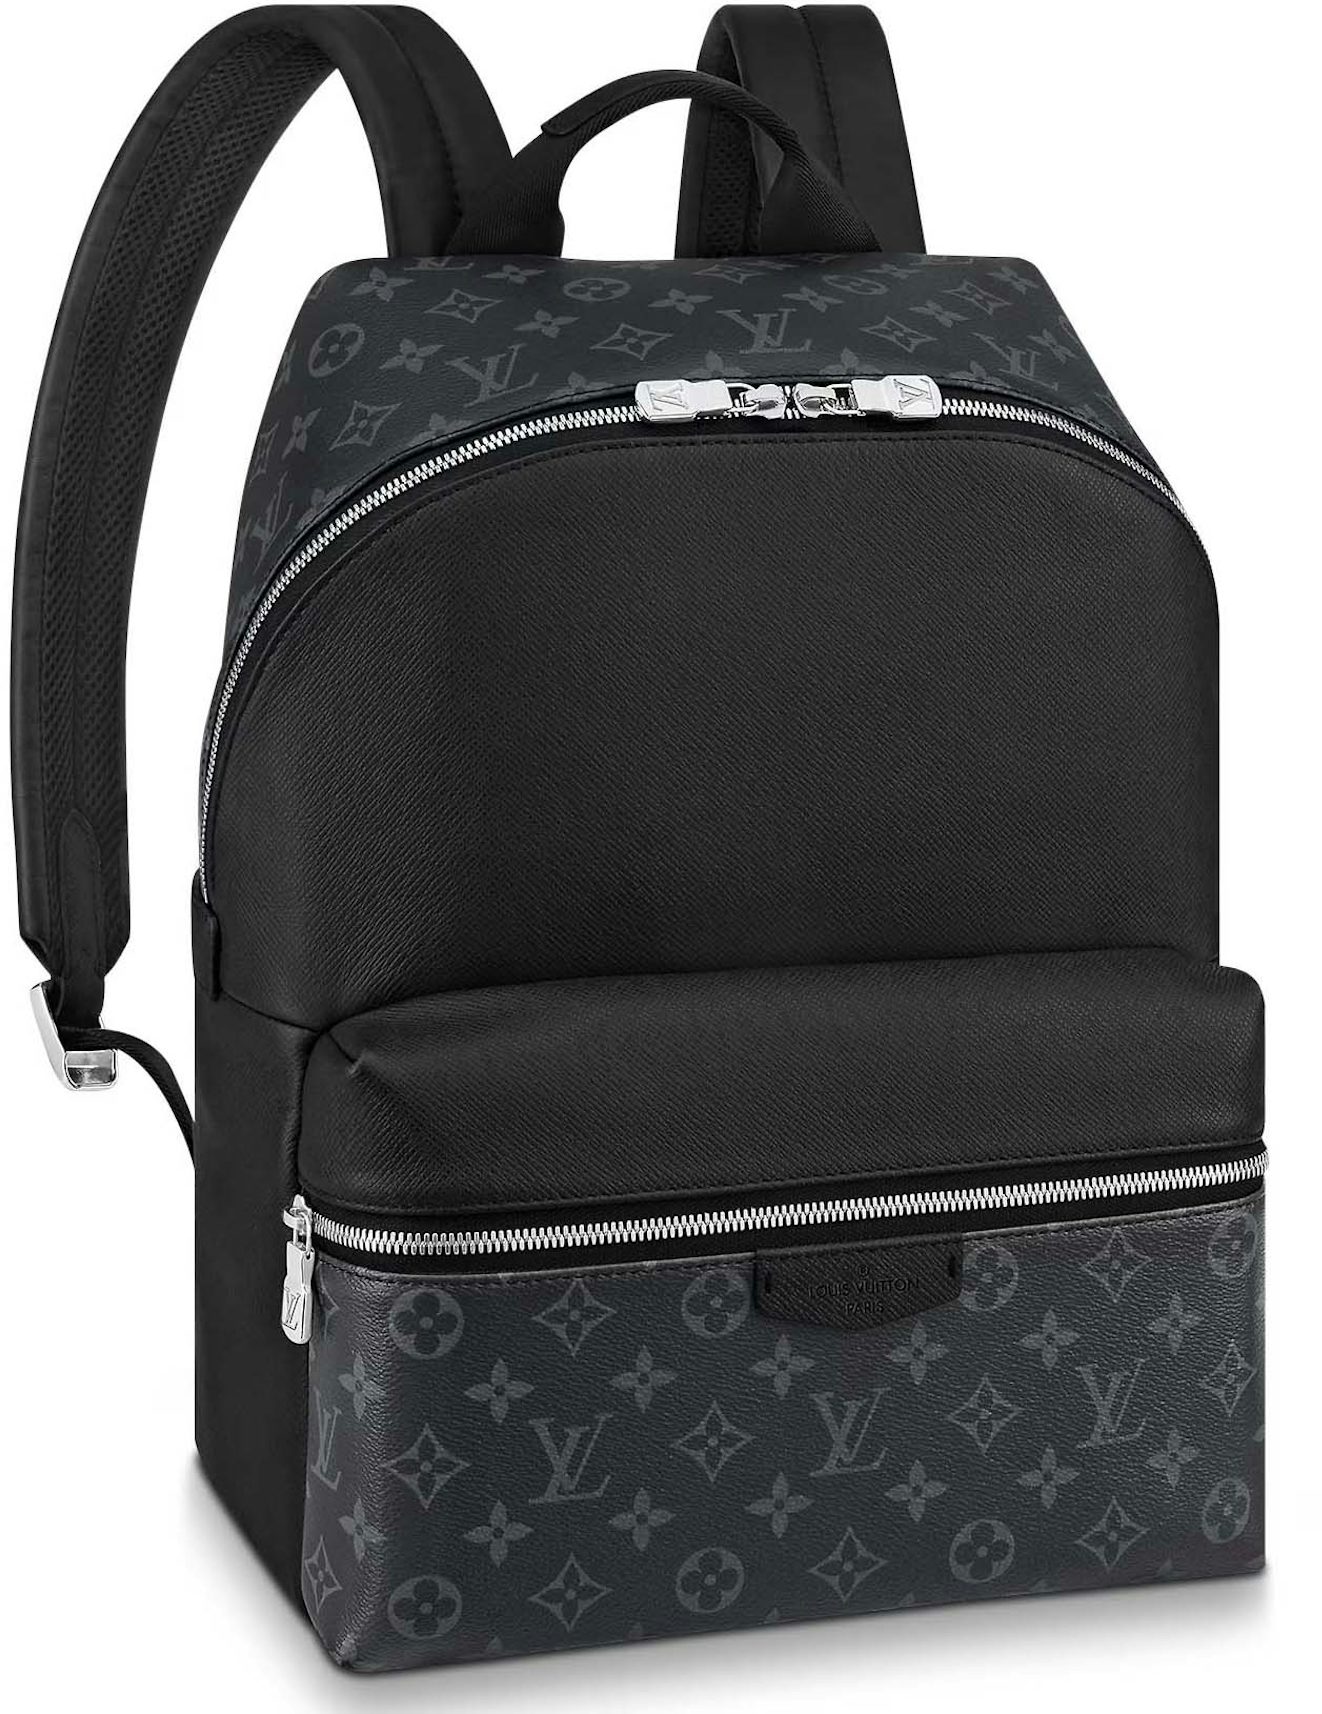 Buy Louis Vuitton Backpack Accessories - Color Black - StockX